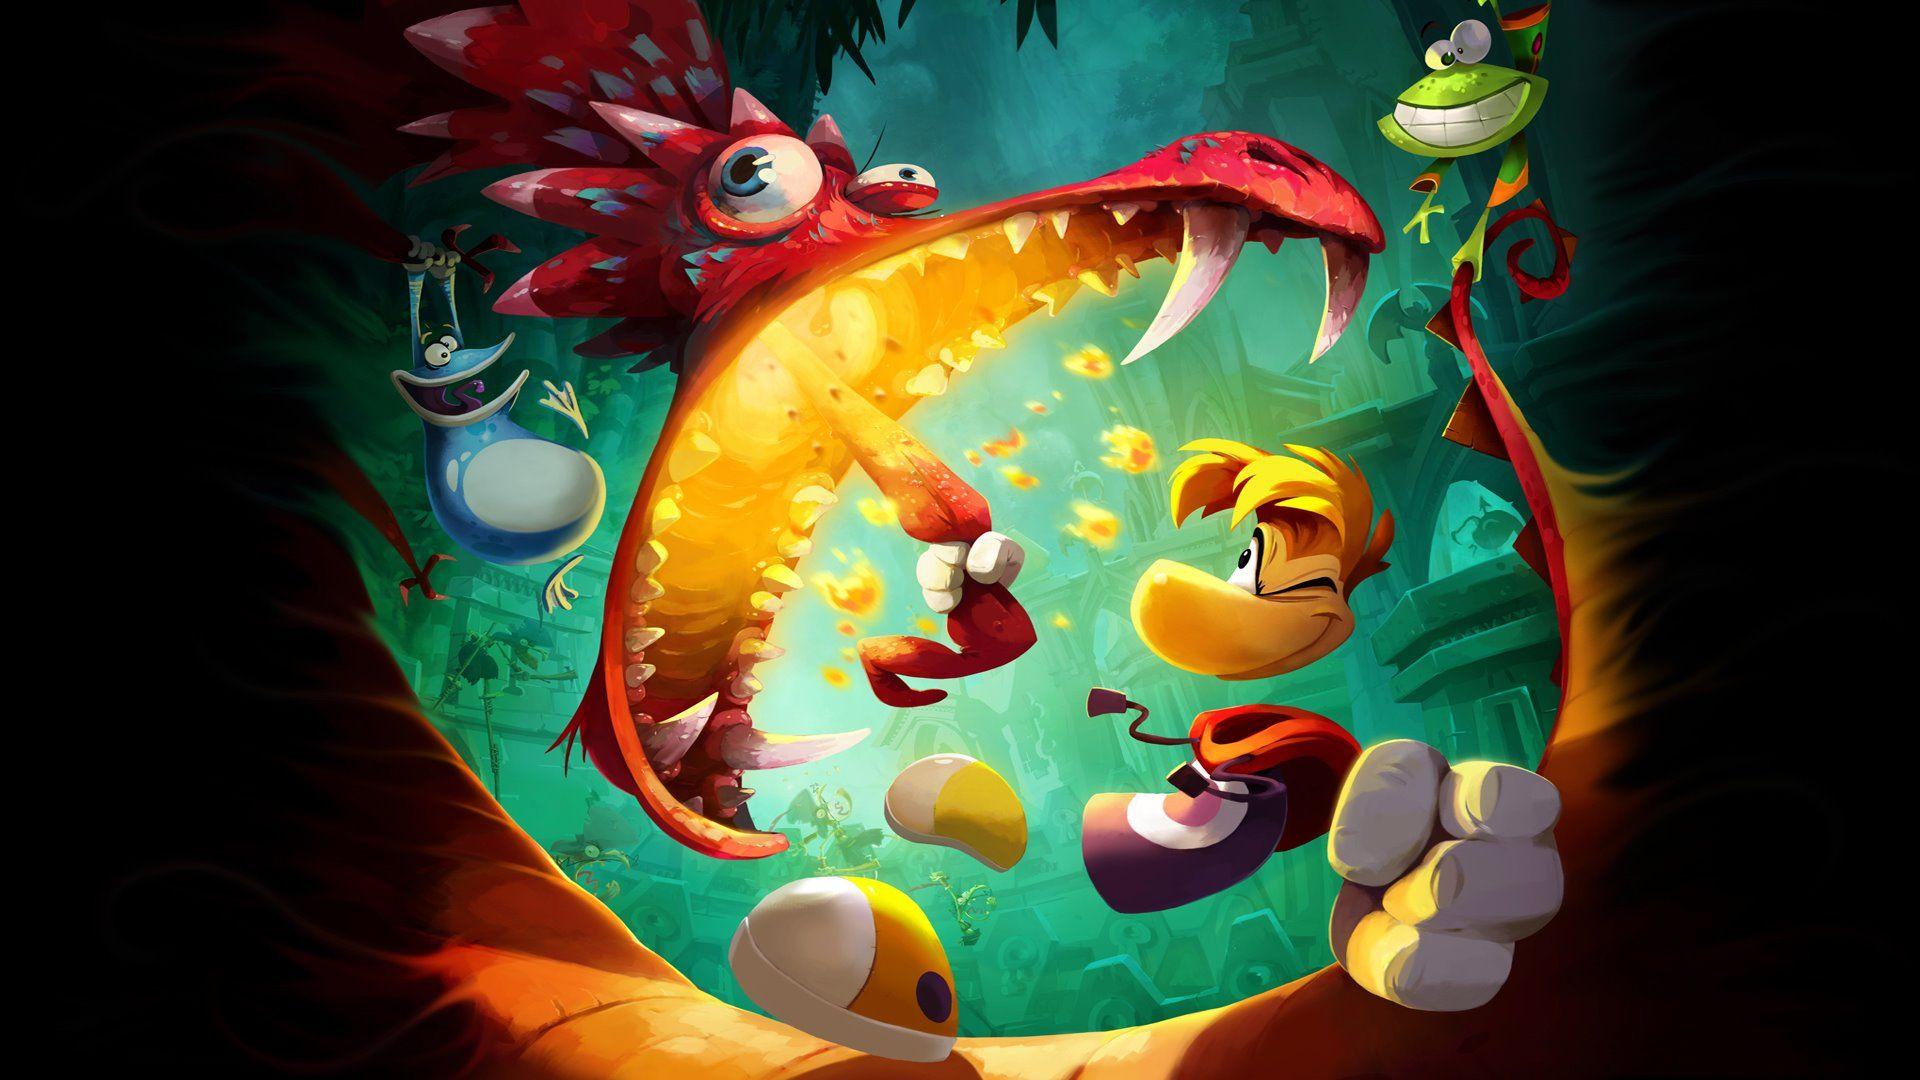 Ubisoft Announces Rayman Legends for PS4 and Xbox One